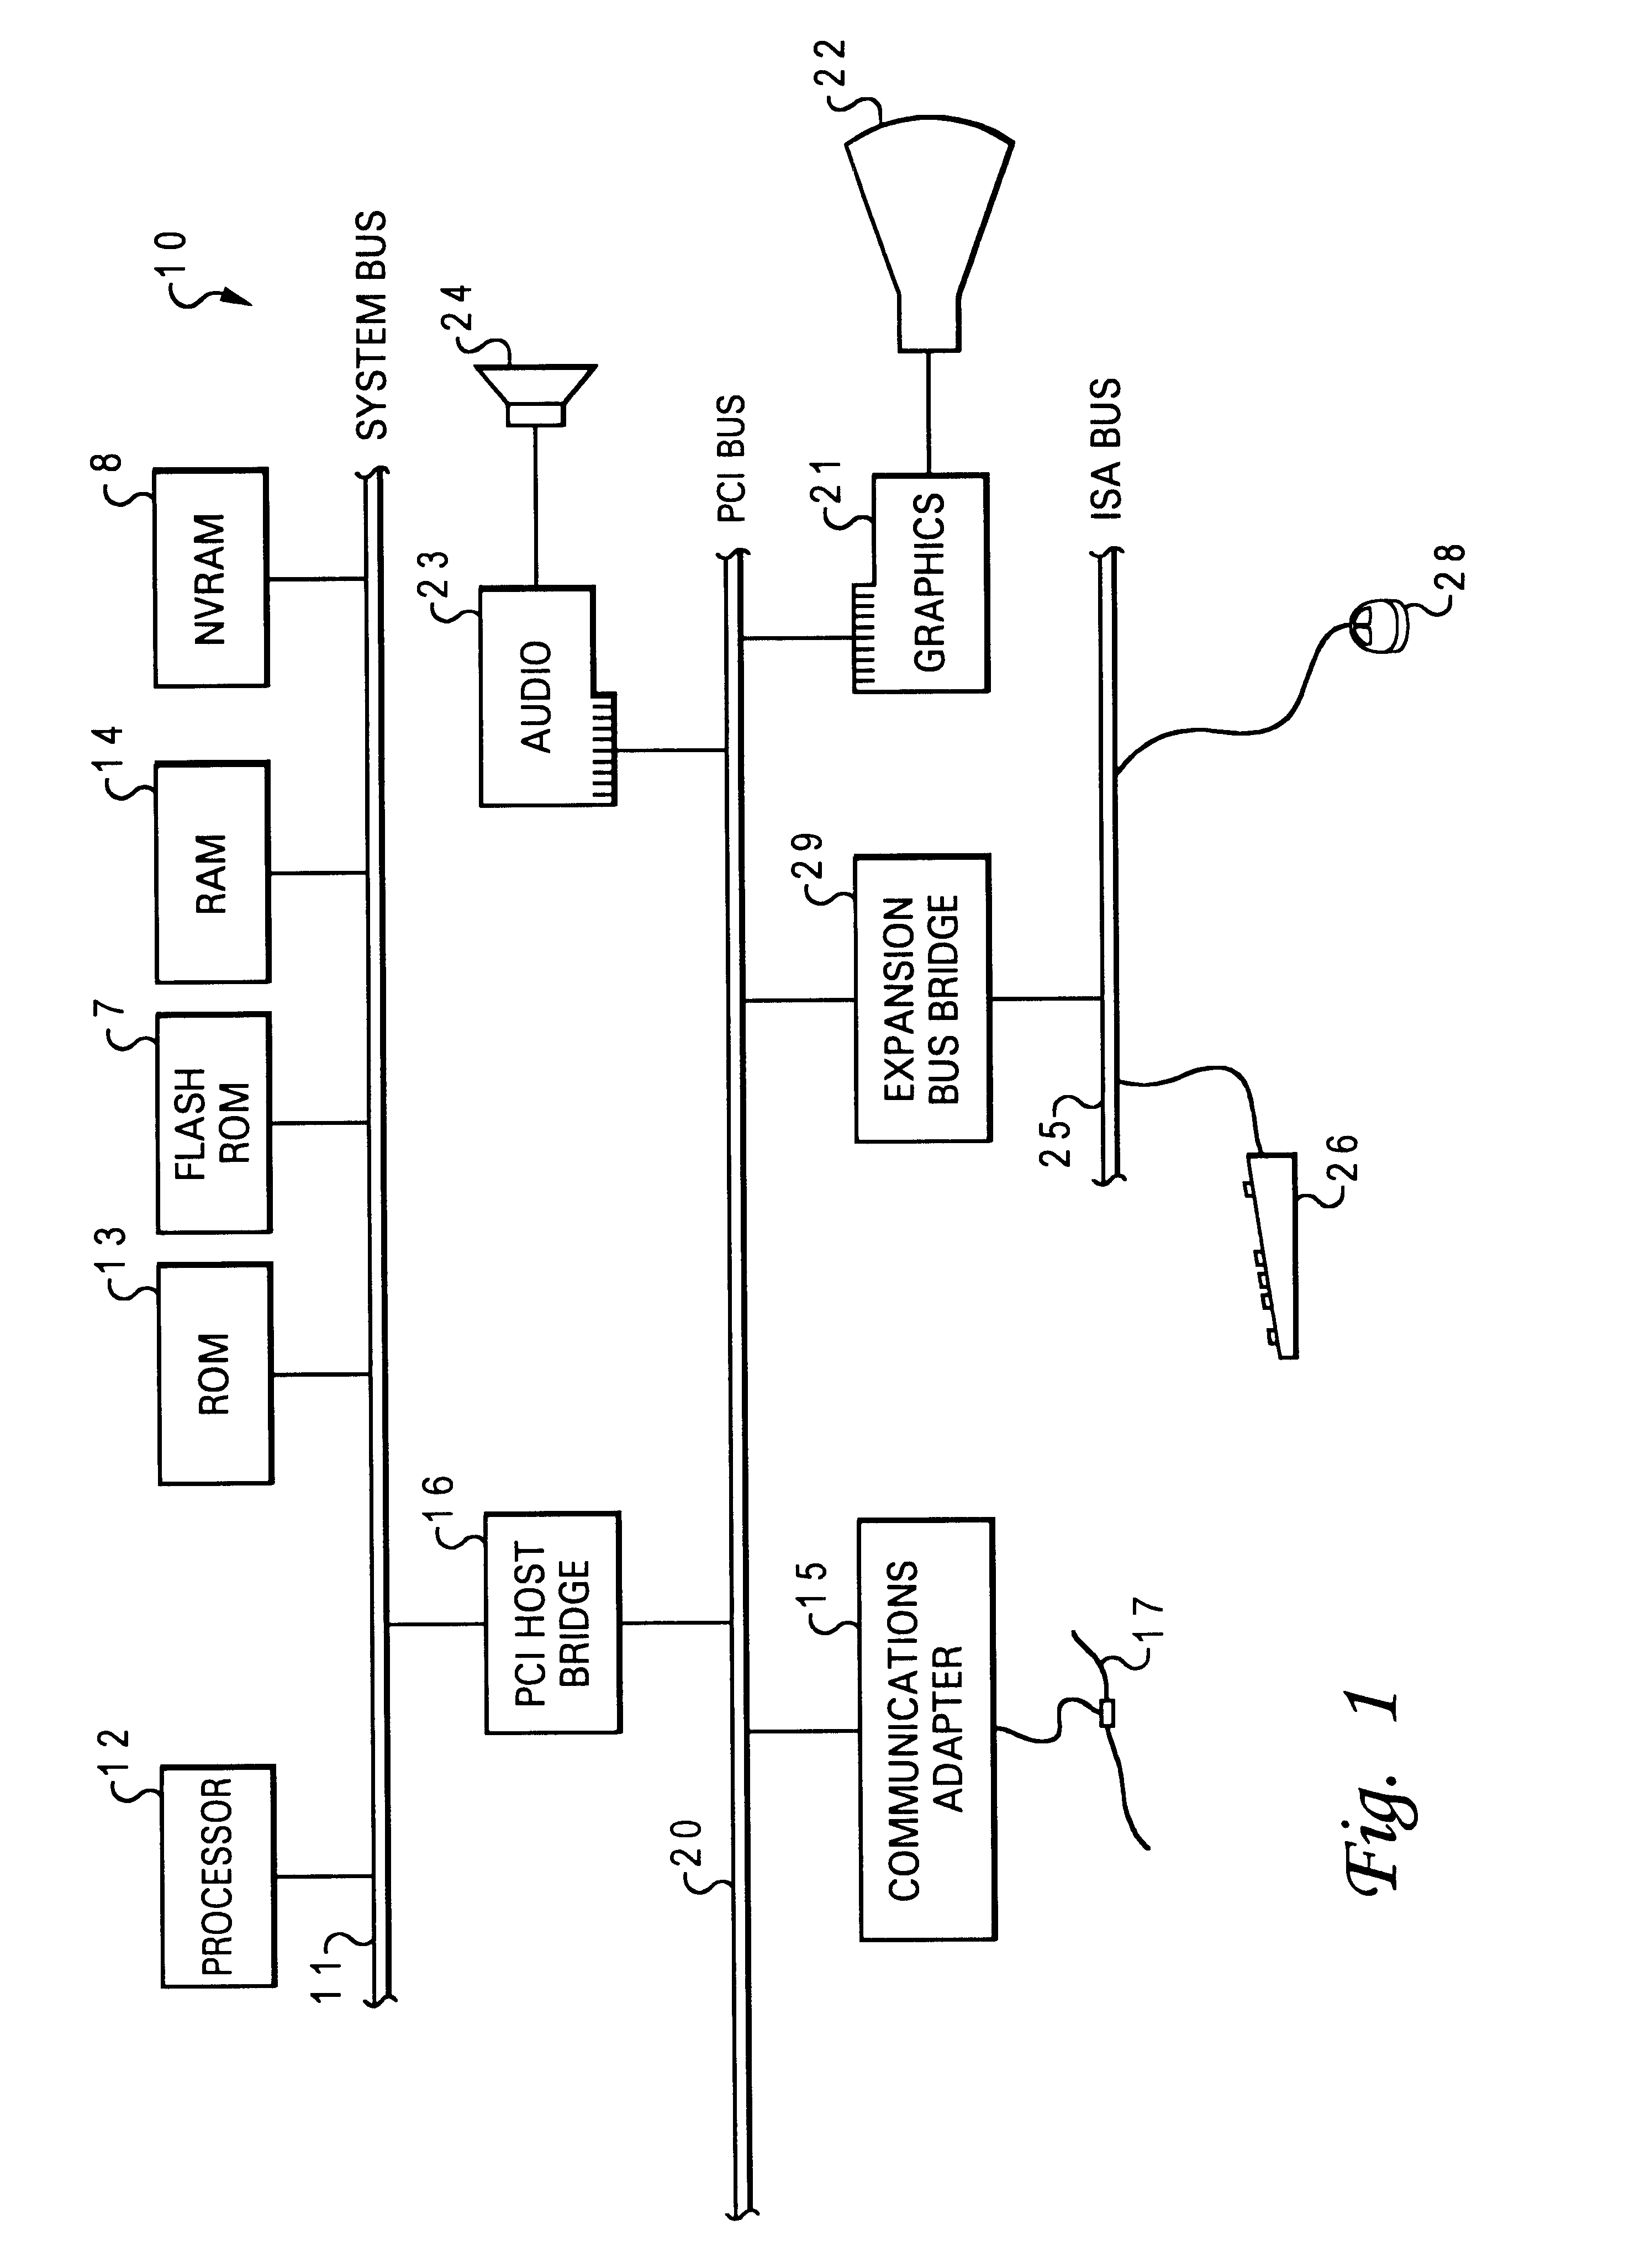 Method and system for automatically configuring the boot process of a computer having multiple bootstrap programs within a network computer system